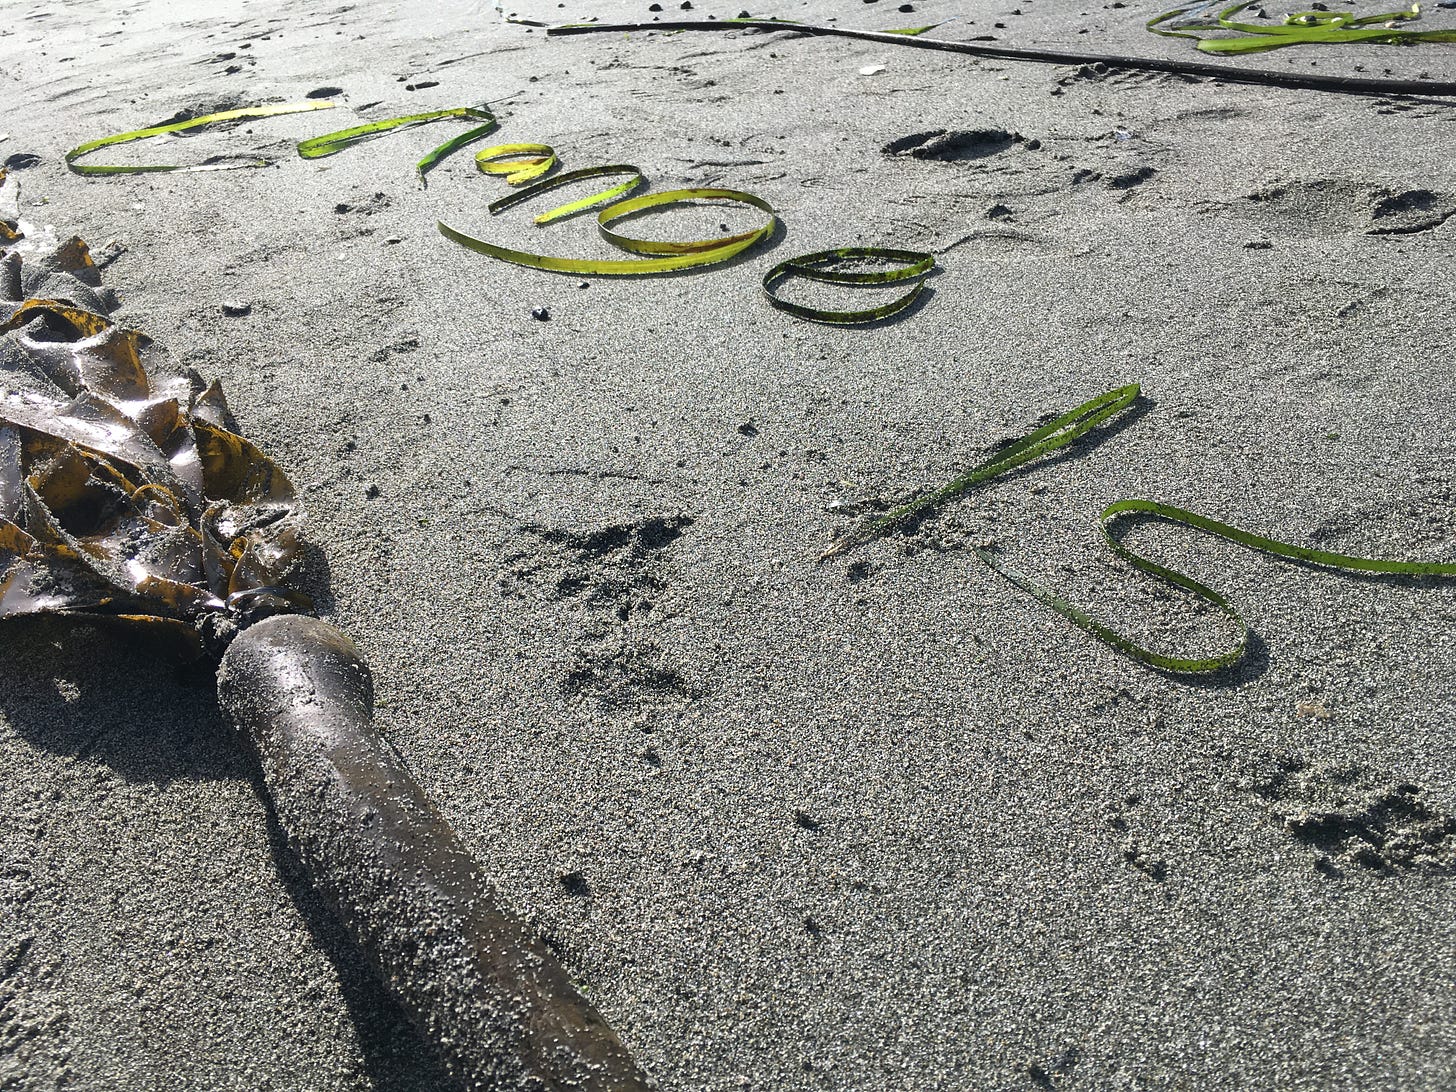 sandy beach with kelp shaped into "Change Is" at an angle. Sunlight catching the kelp so it's bright. footprints on sand.